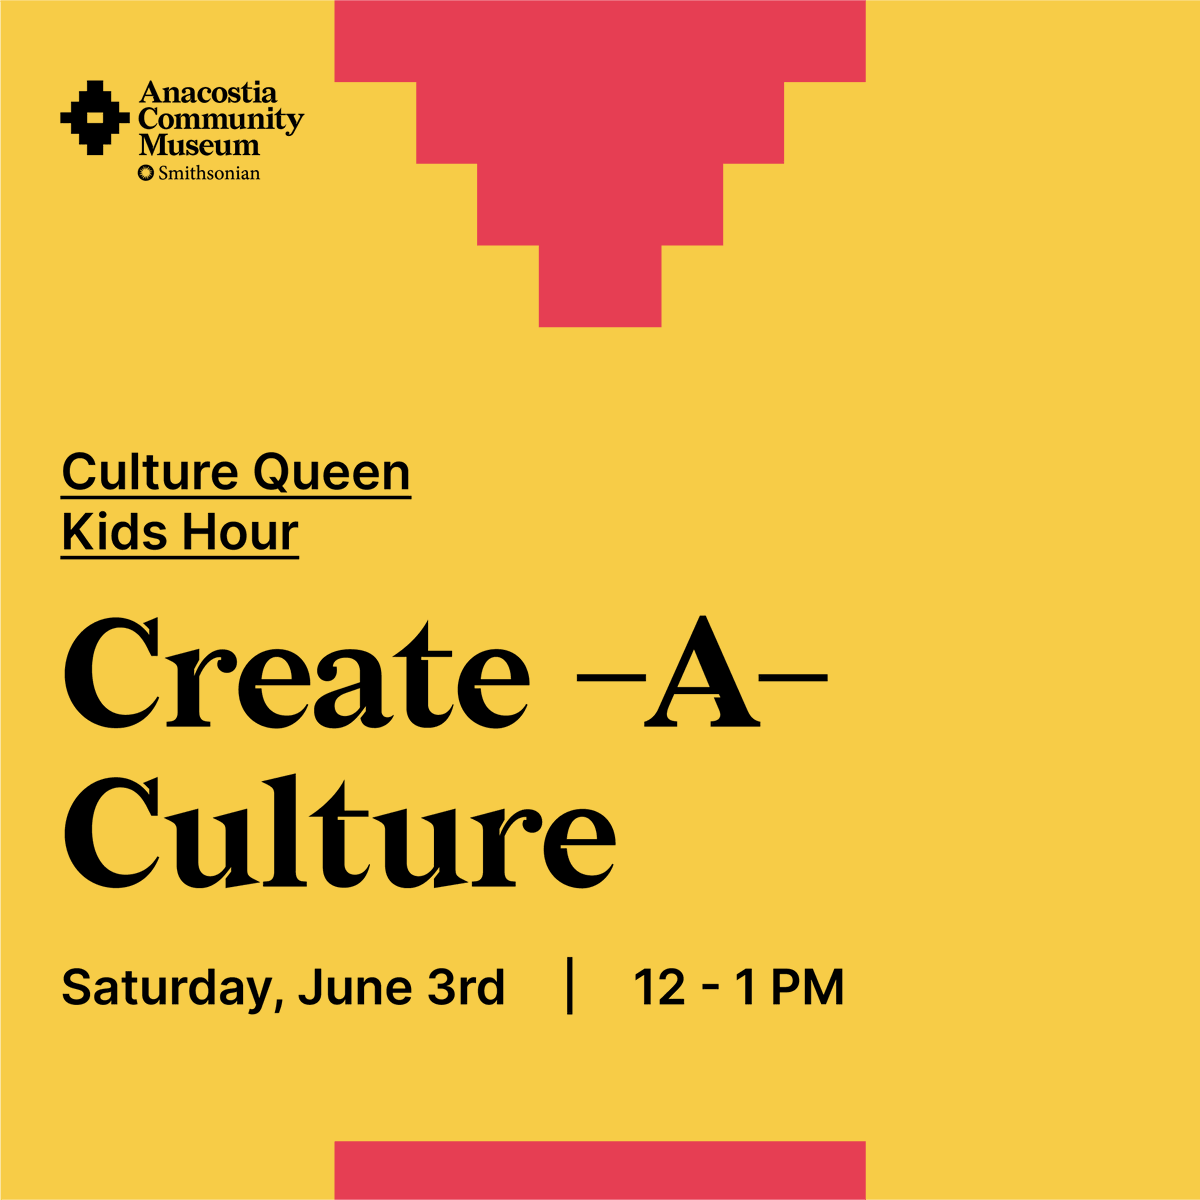 Culture Queen is back this Saturday! Learn more & register on our website: s.si.edu/43fmpxP